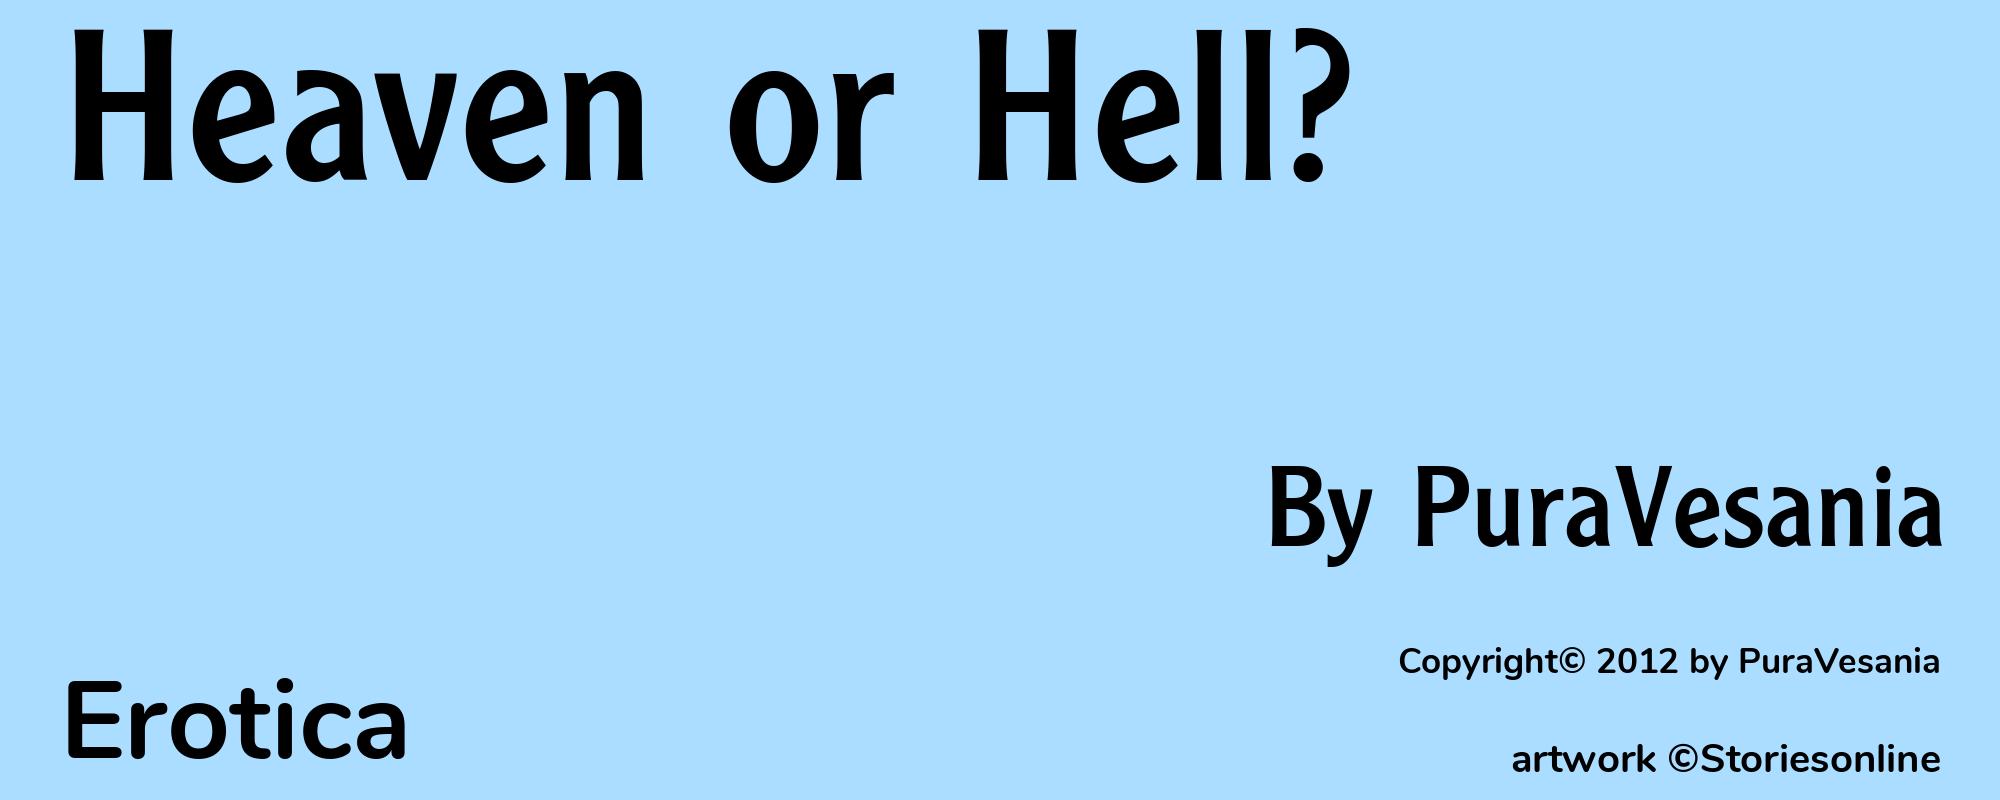 Heaven or Hell? - Cover